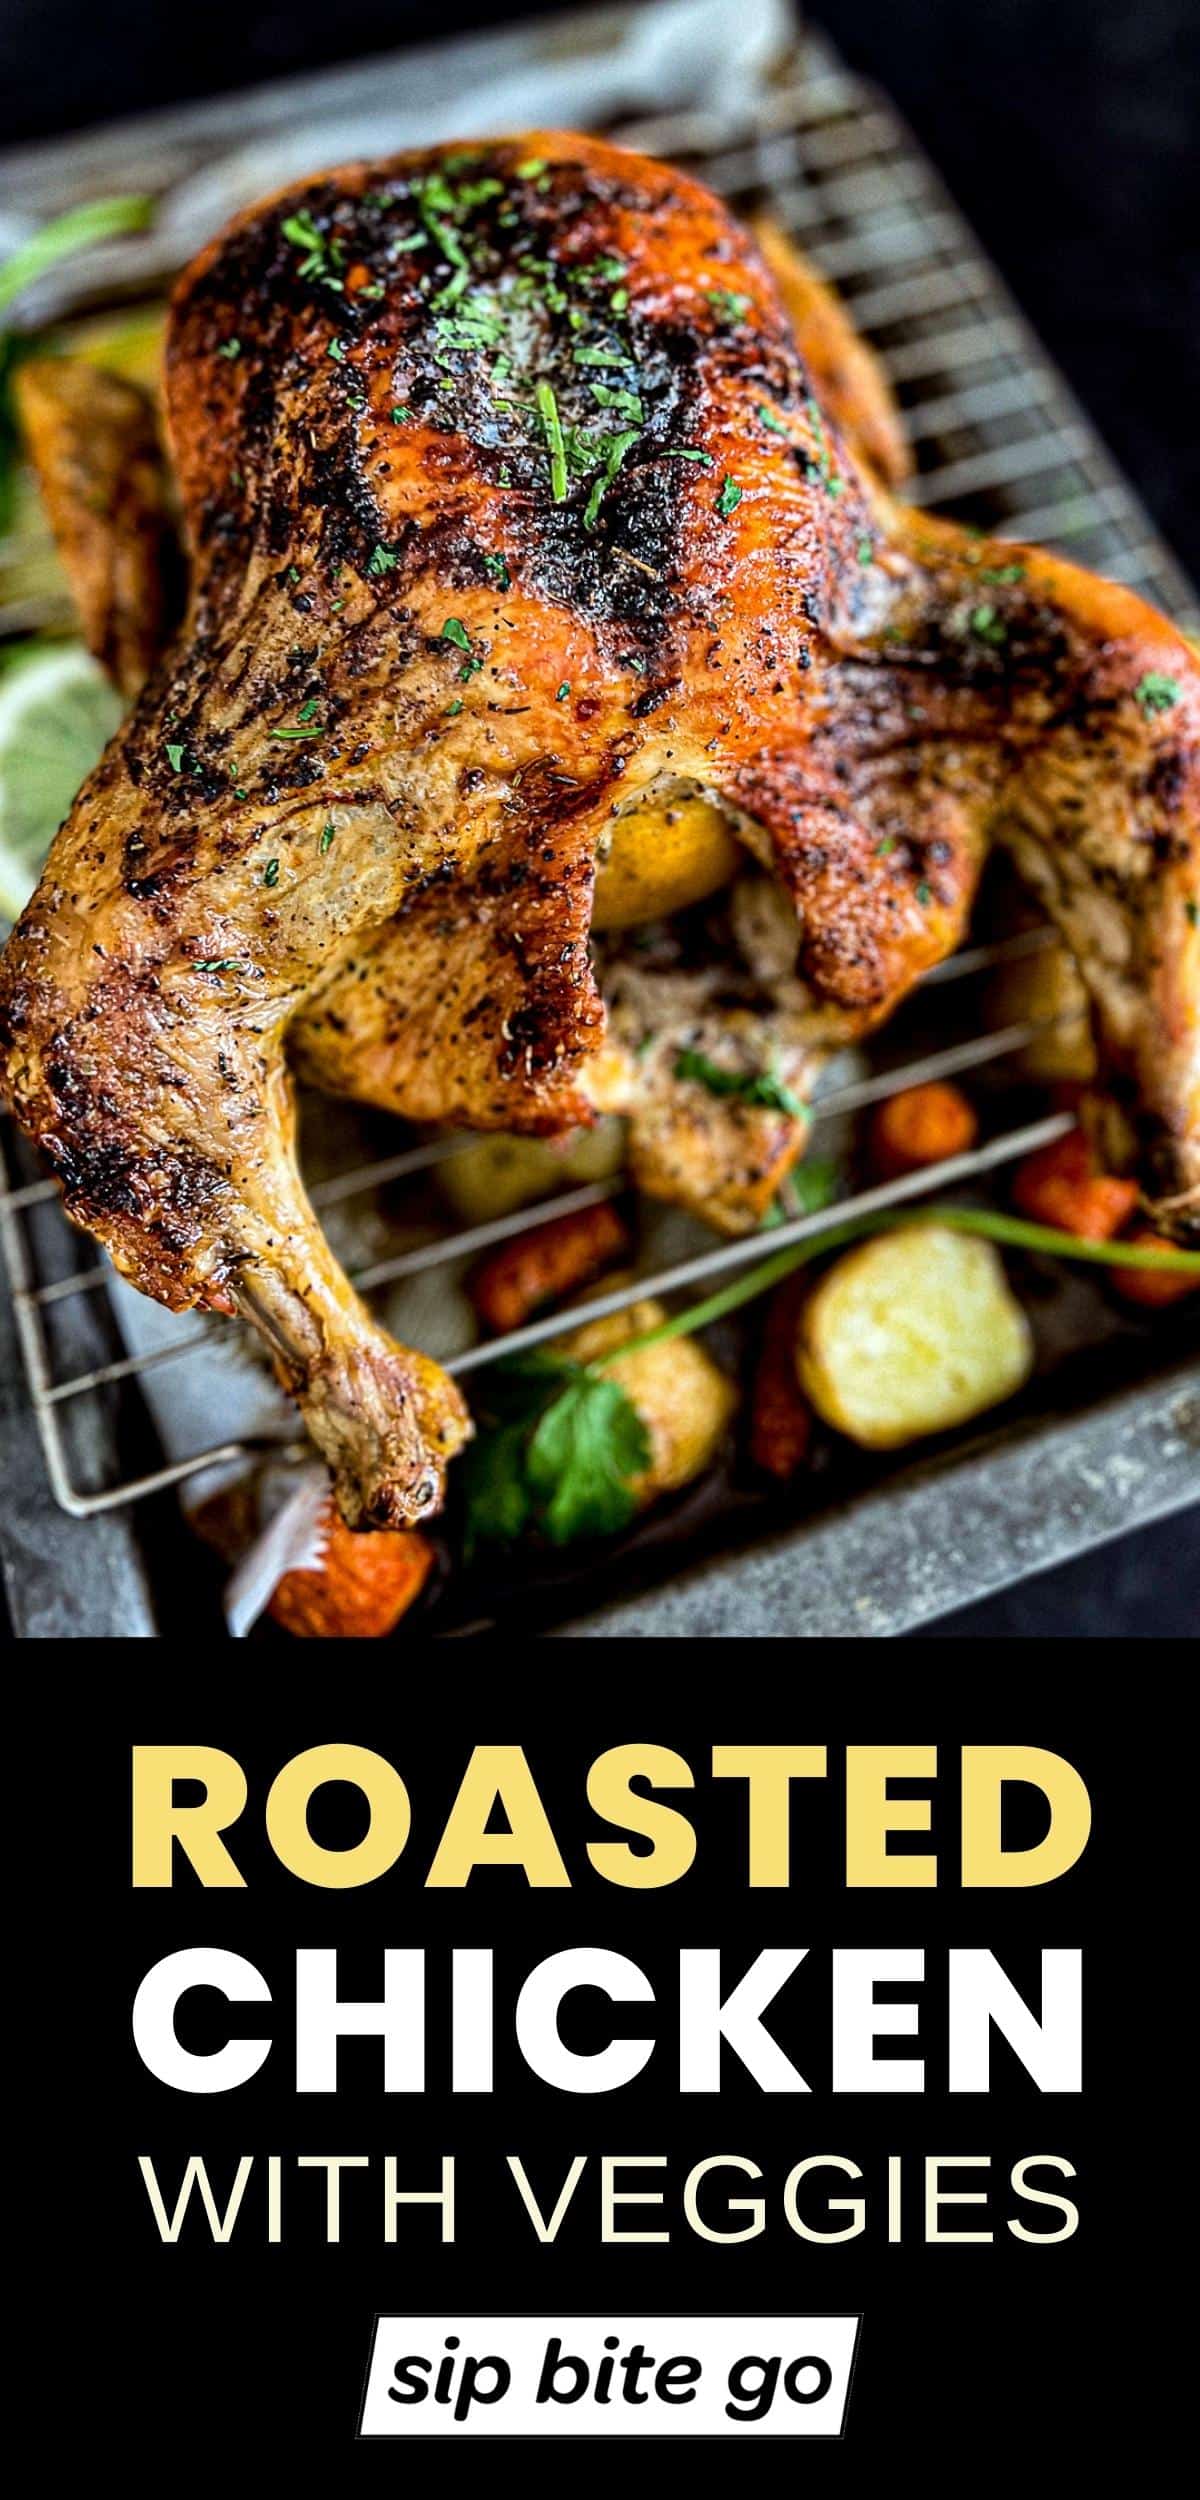 Roasted Chicken In Oven Recipe with veggies and potatoes with text overlay and Sip Bite Go logo